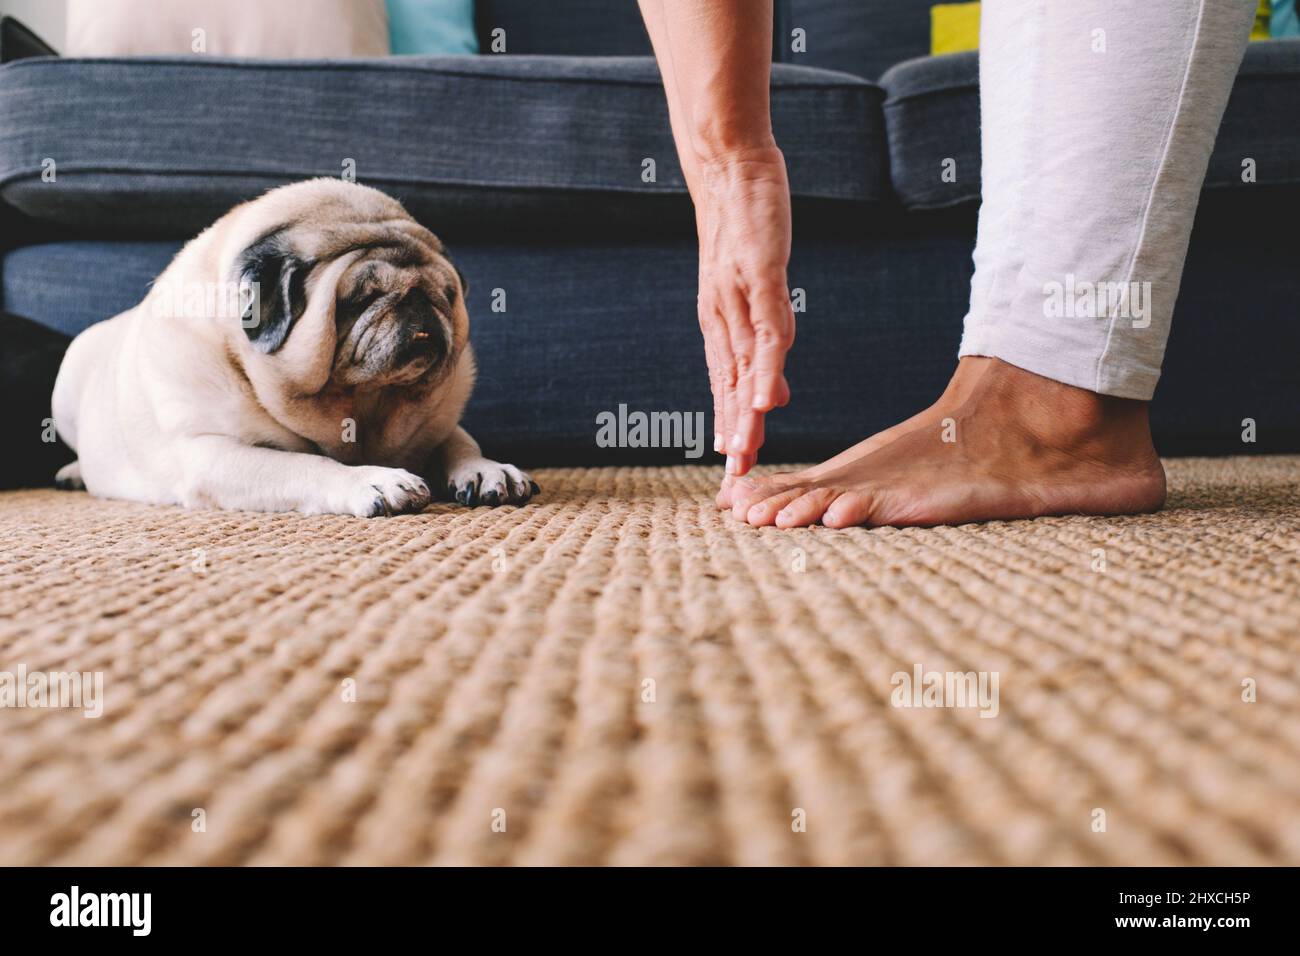 Woman, Detail, Hands, Feet, Stretching, Dog, living room, floor Stock Photo